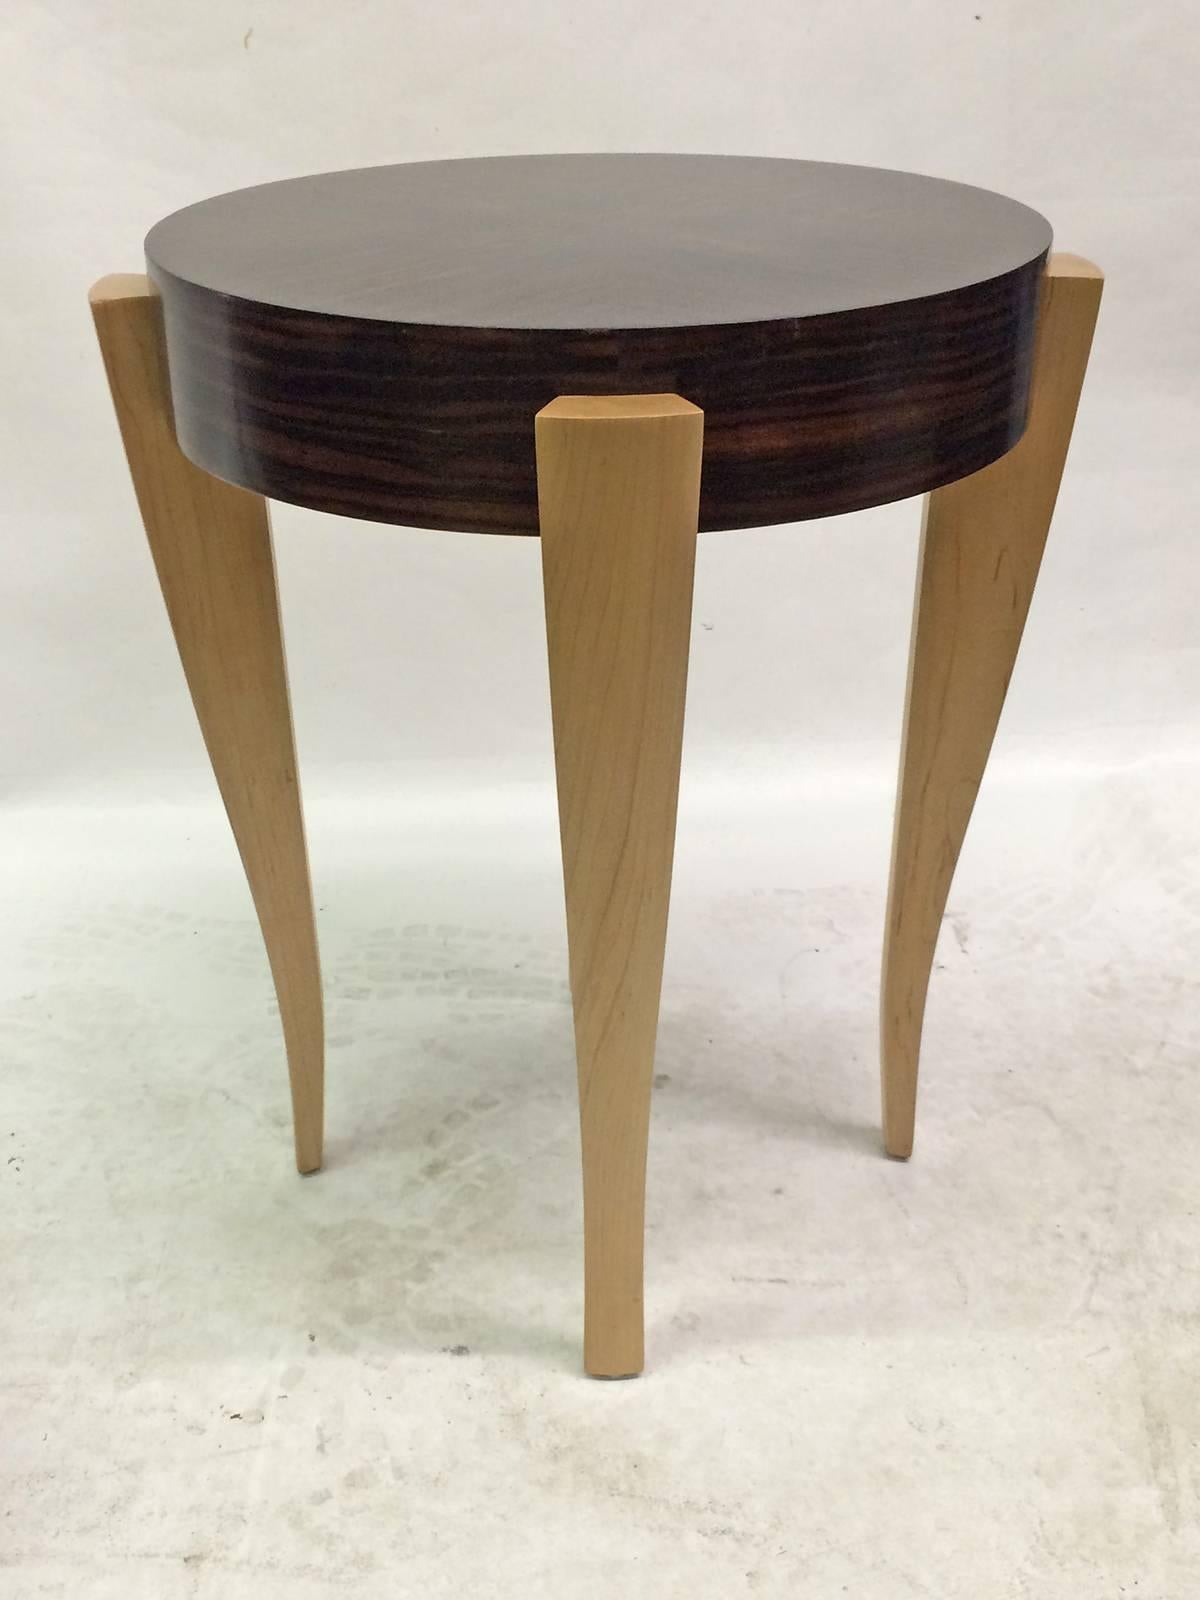 An elegant four legged entry/side table finished with sycamore legs and Macassar veneer on the top.